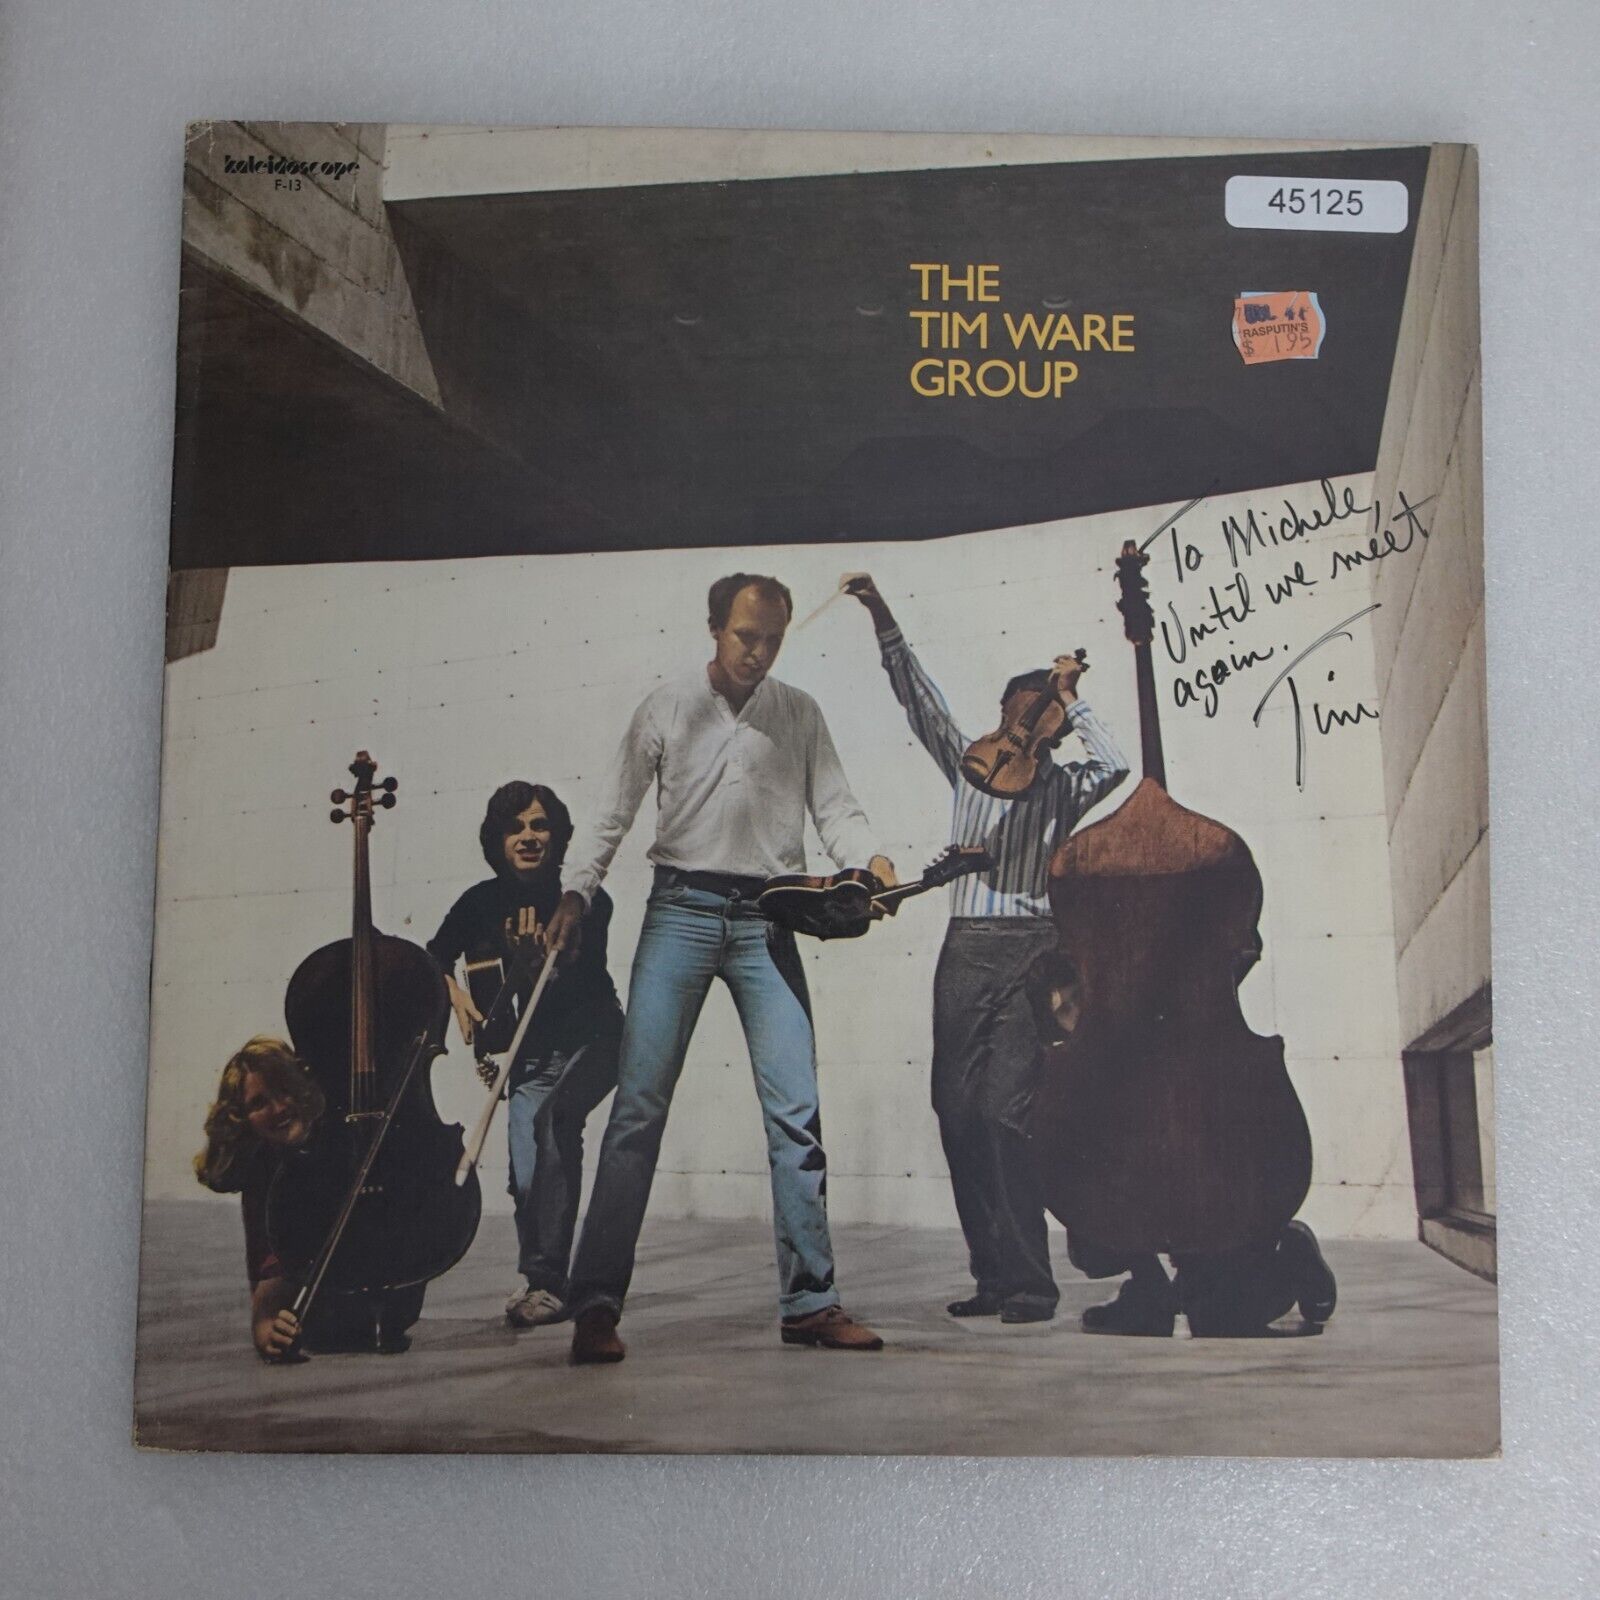 The Time Ware Group Self Titled LP Vinyl Record Album